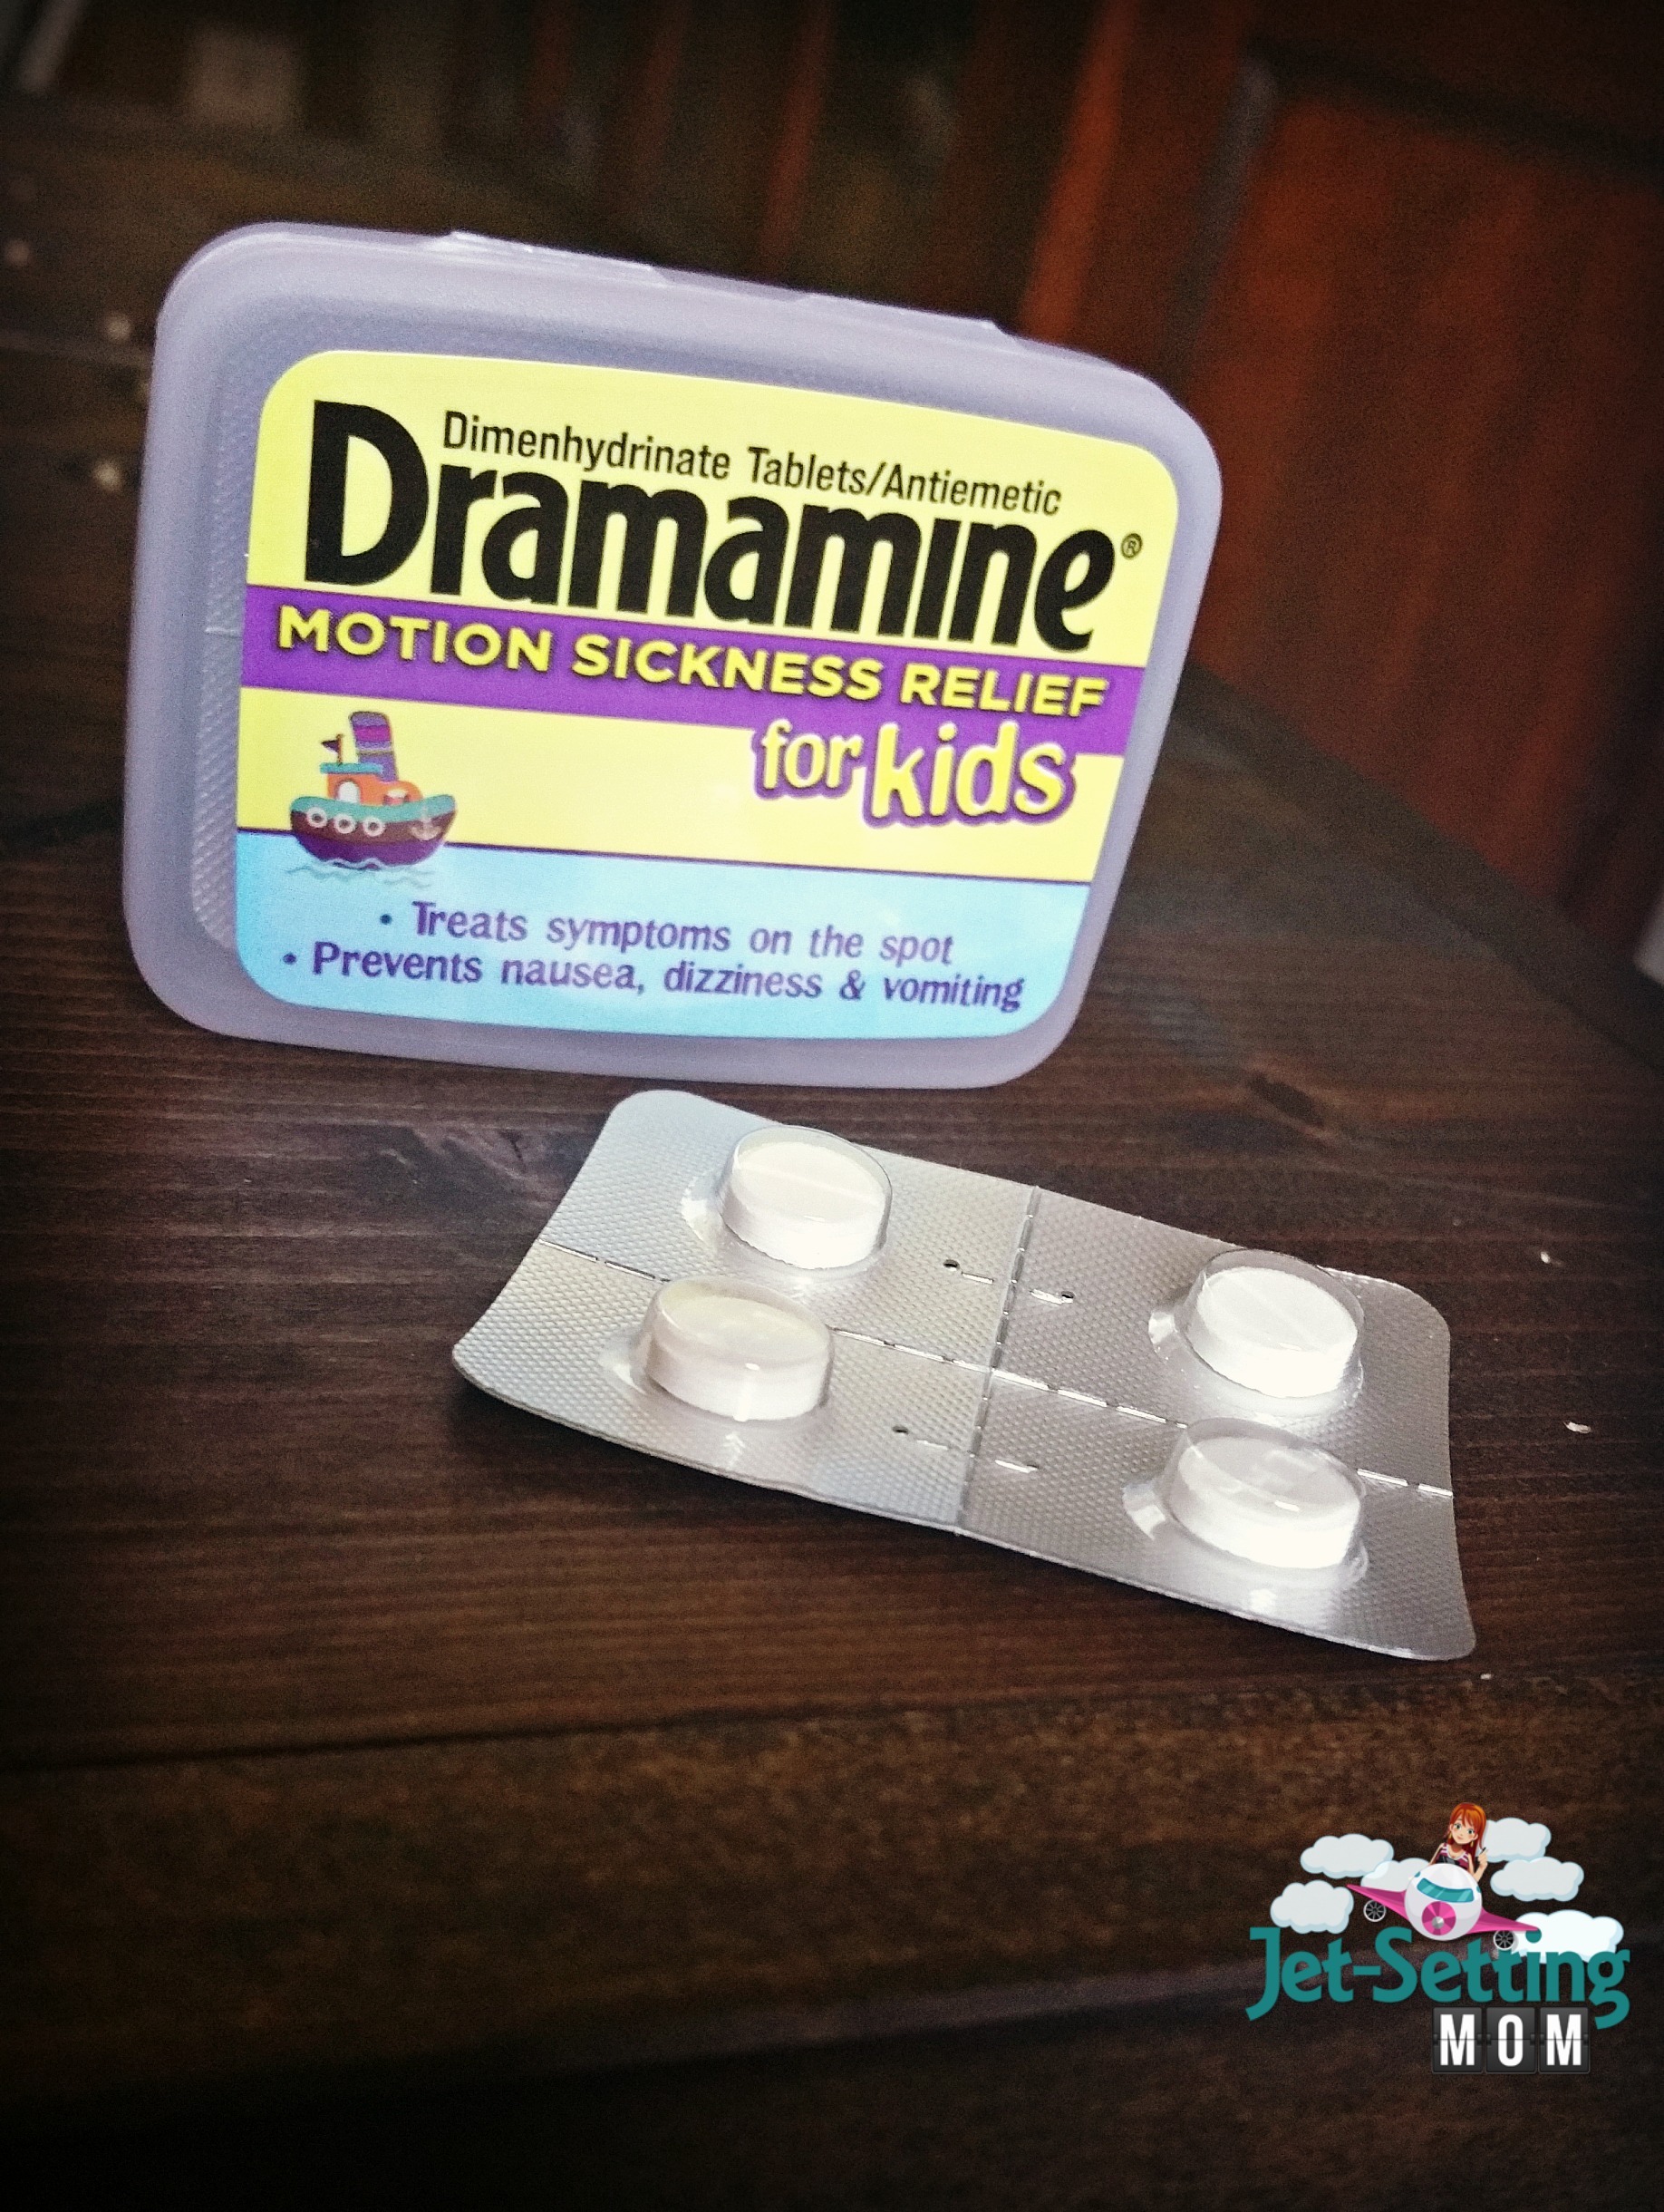 Dramamine® for Kids offers great motion sickness to kids while traveling! #AdventuresInMotion #IC #ad #travel #familytravel